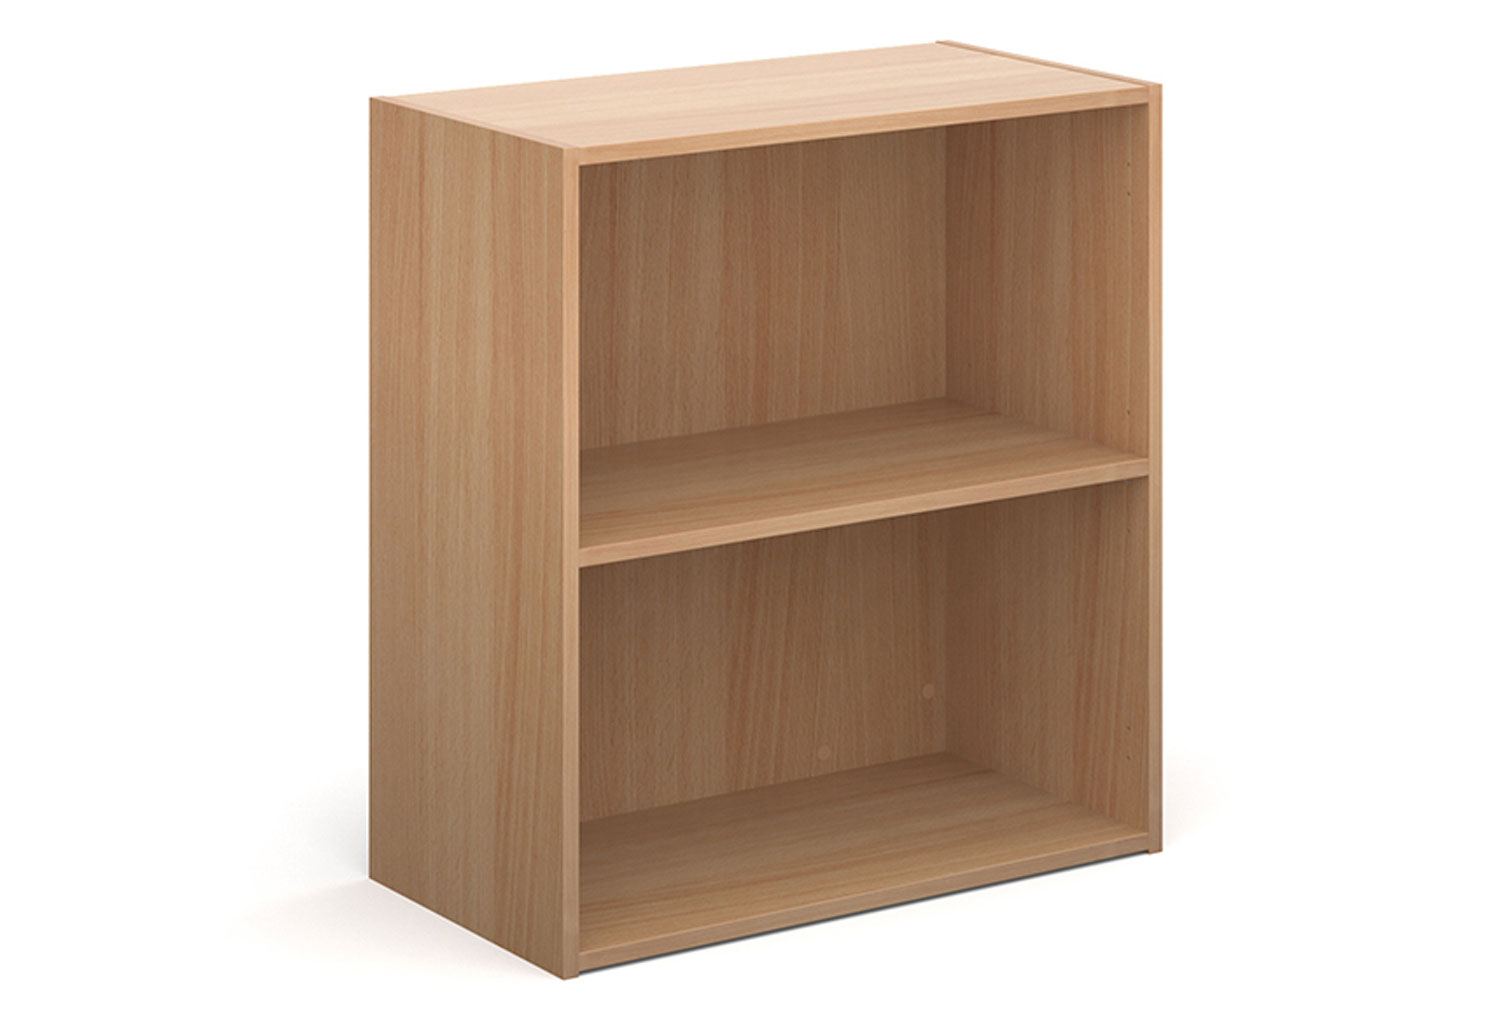 Value Line Classic+ Office Bookcases, 1 Shelf - 76wx39dx83h (cm), Beech, Express Delivery